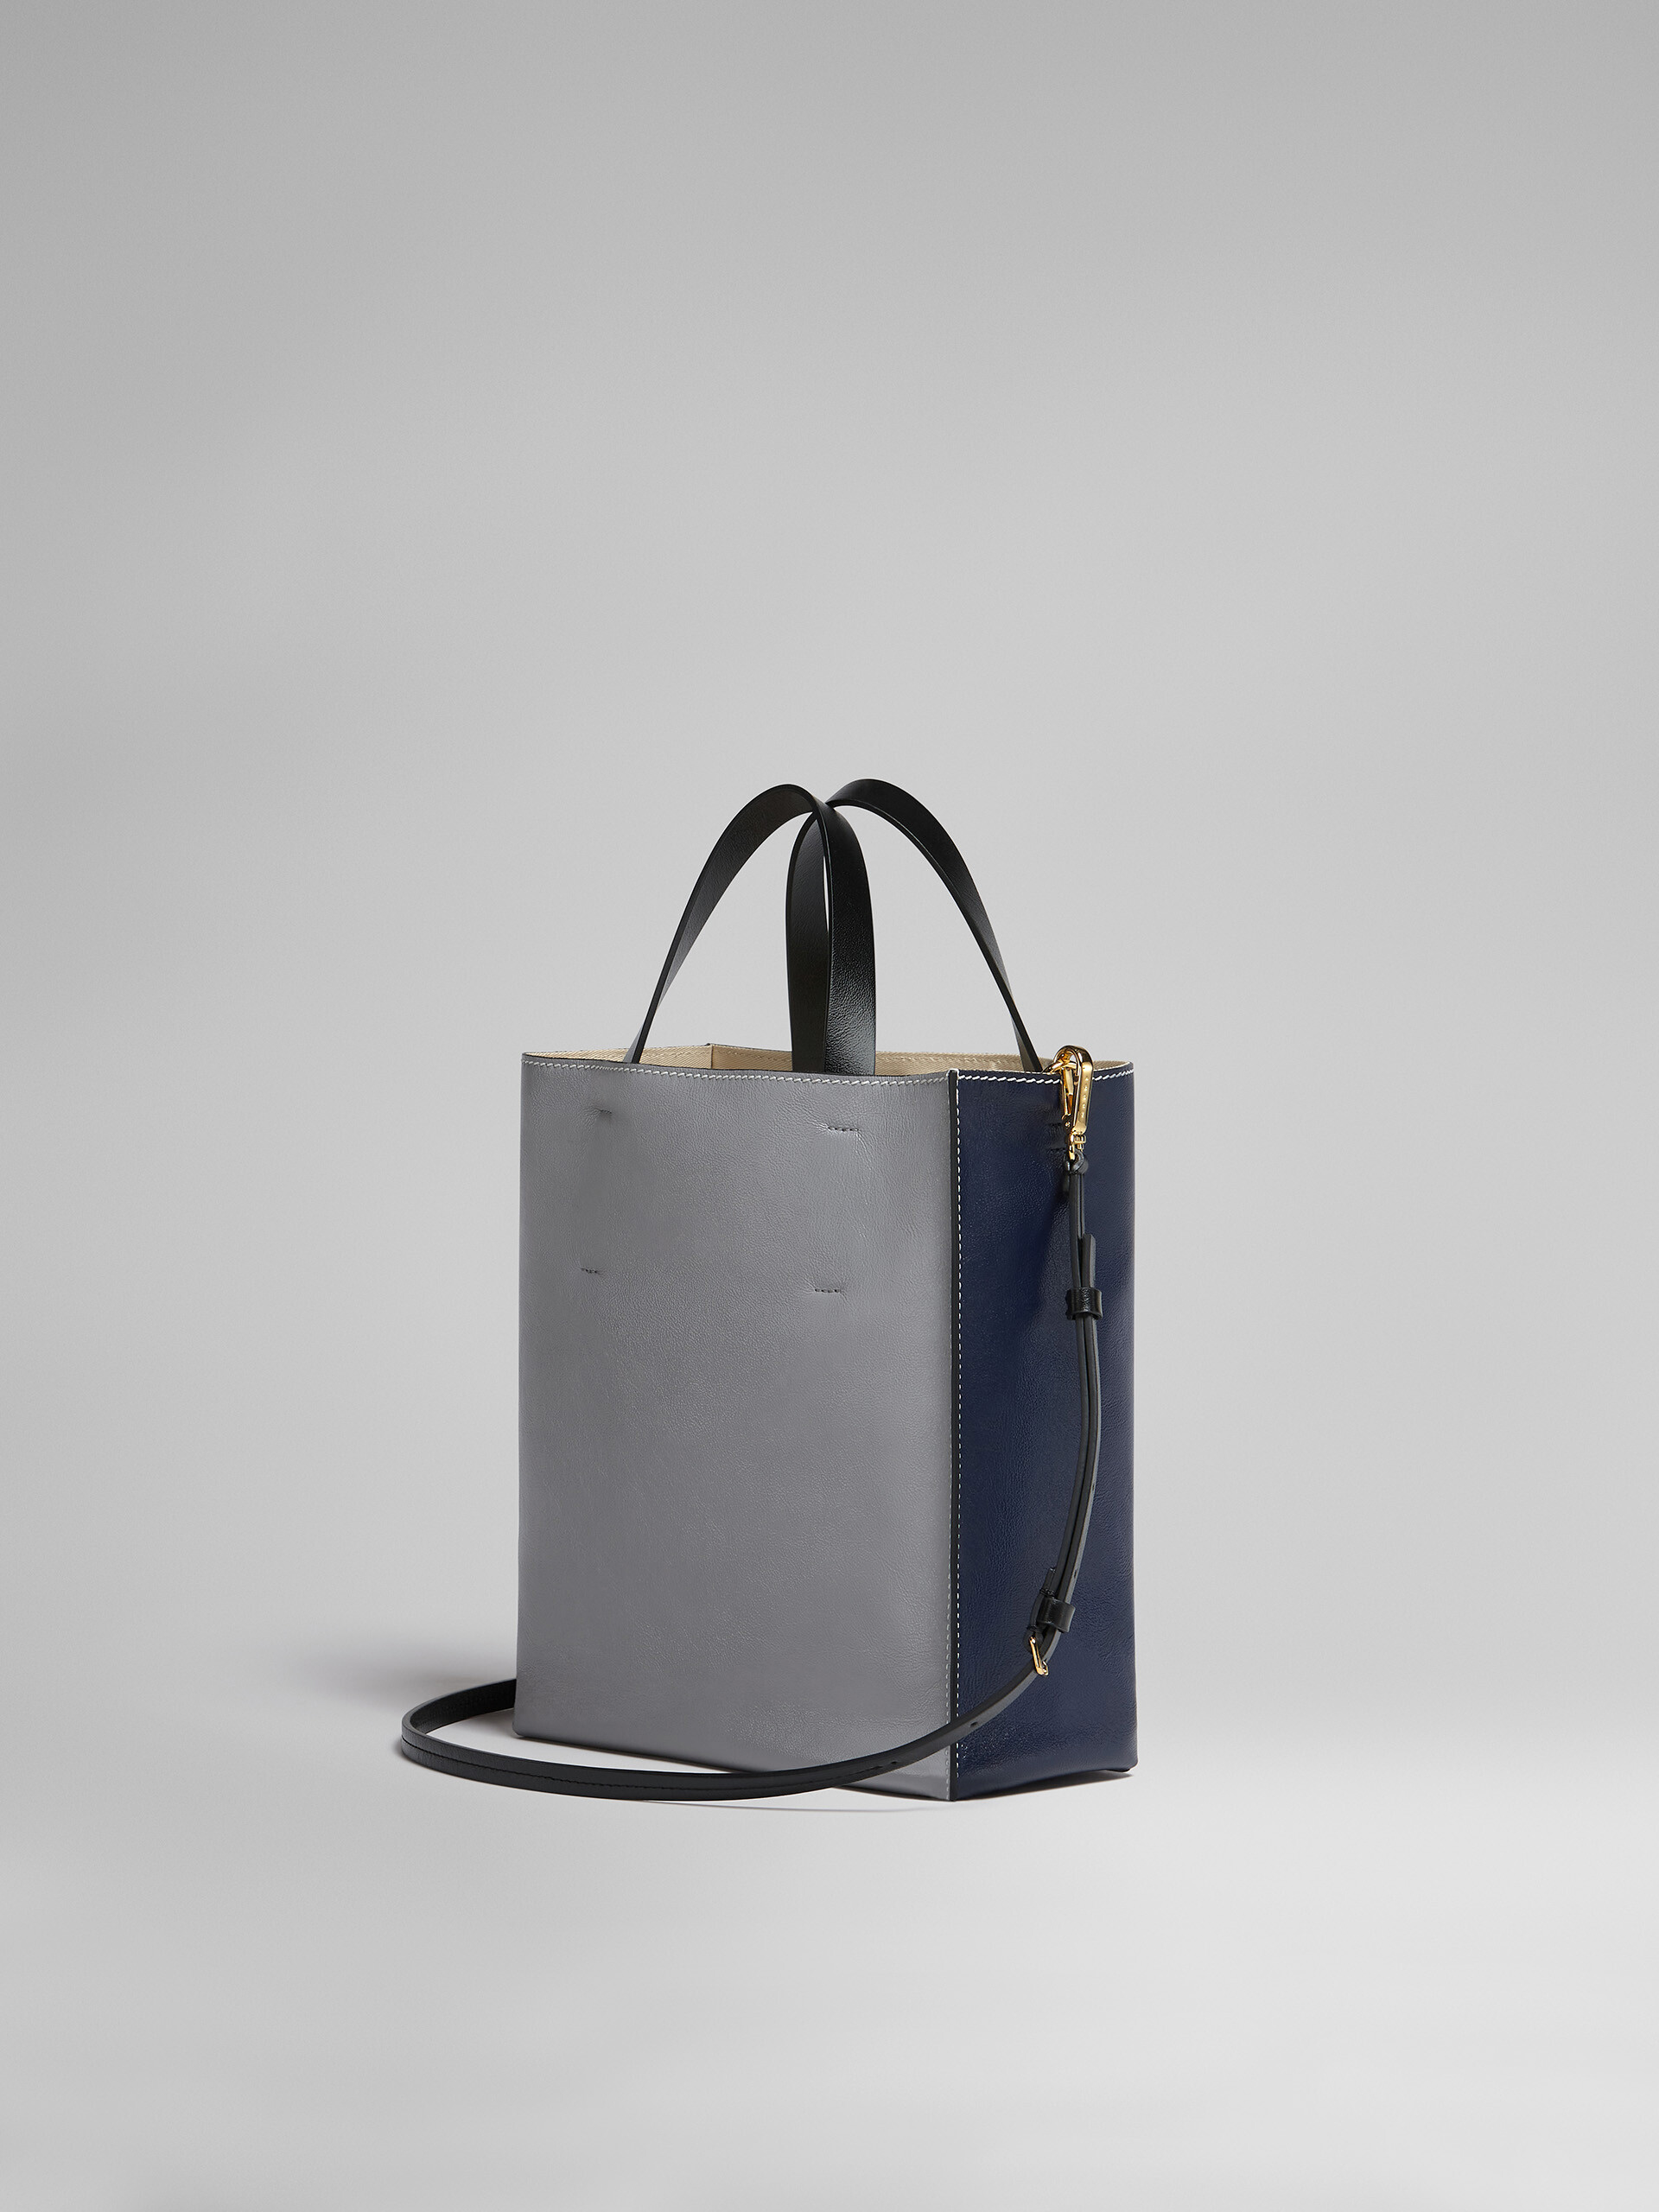 MUSEO SOFT small bag in blue and grey leather - Shopping Bags - Image 3